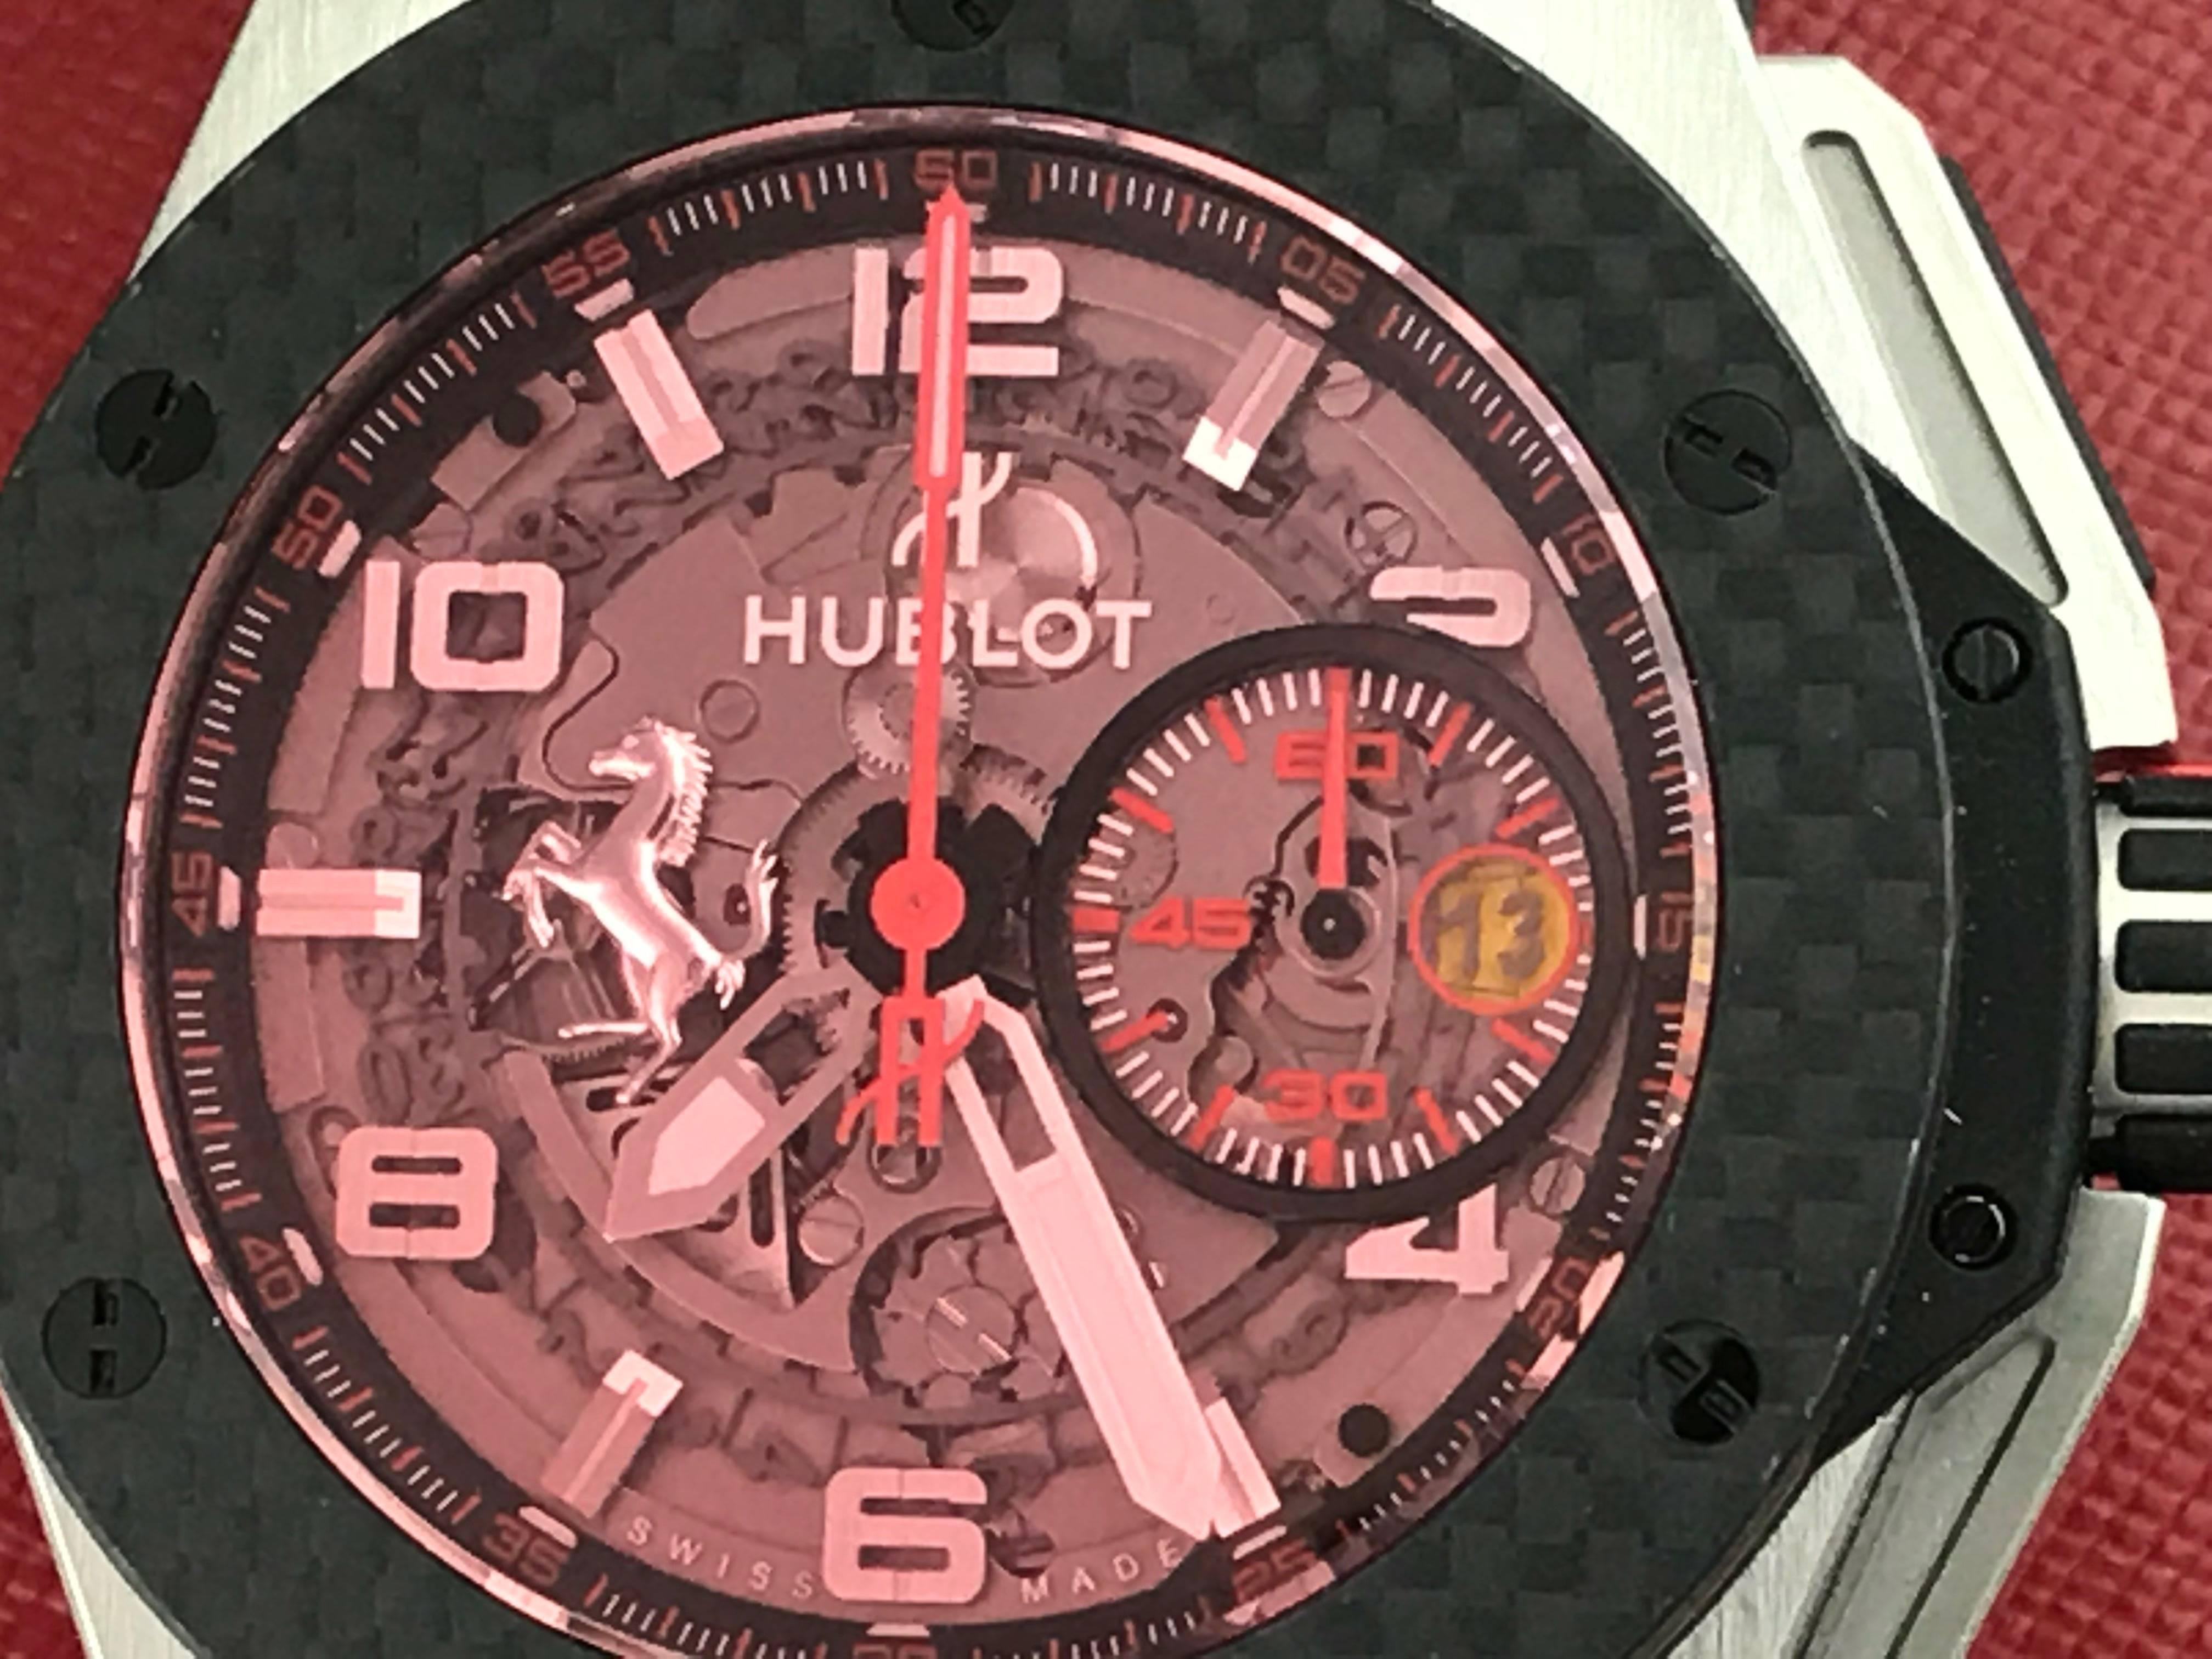 Hublot Big Bang Ferrari Red Magic Chronograph Automatic Men's wrist watch. Model 401.QX.0123.VR. Never Worn Limited Edition of 1000 Individually Numbered Pieces. Hublot Caliber HUB1241 Automatic Winding Movement with Thirty-Eight Jewels. Red